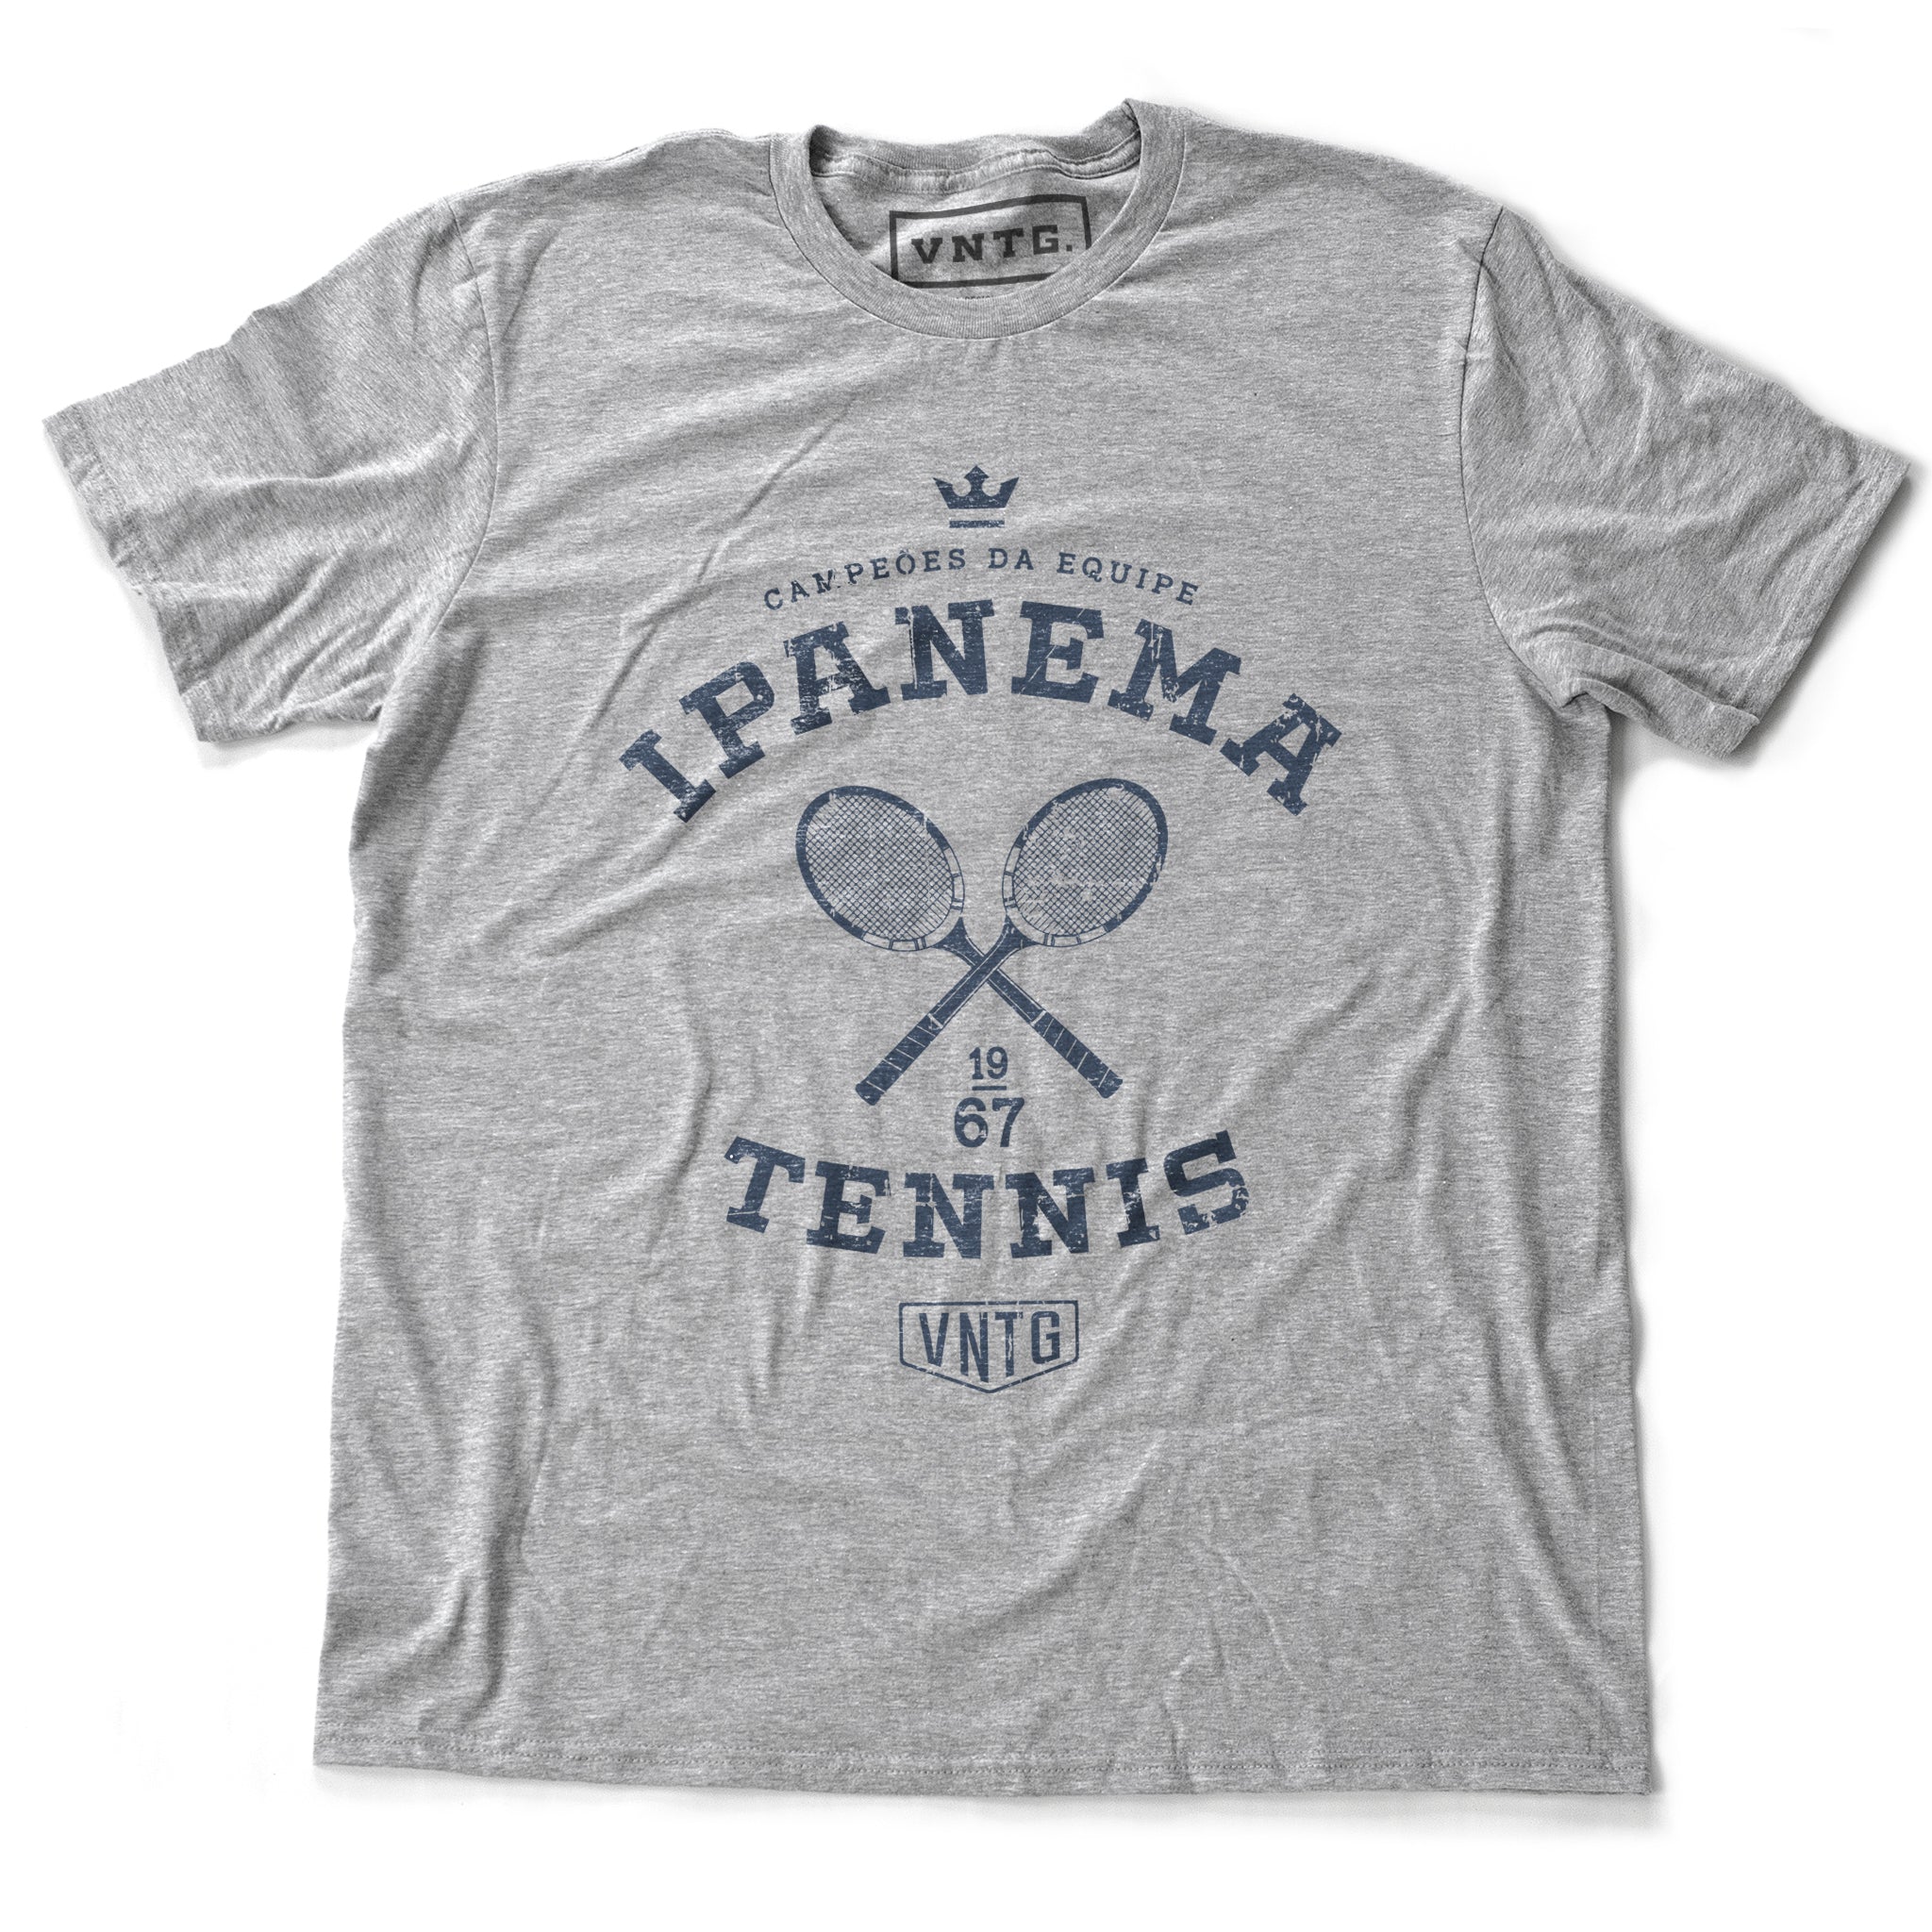 Vintage-inspired, retro graphic sports t-shirt in Athletic Heather Gray, as a ‘team’ shirt for a fictitious tennis team championship in Ipanema, Rio de Janeiro, Brazil. By fashion brand VNTG., from wolfsaint.net